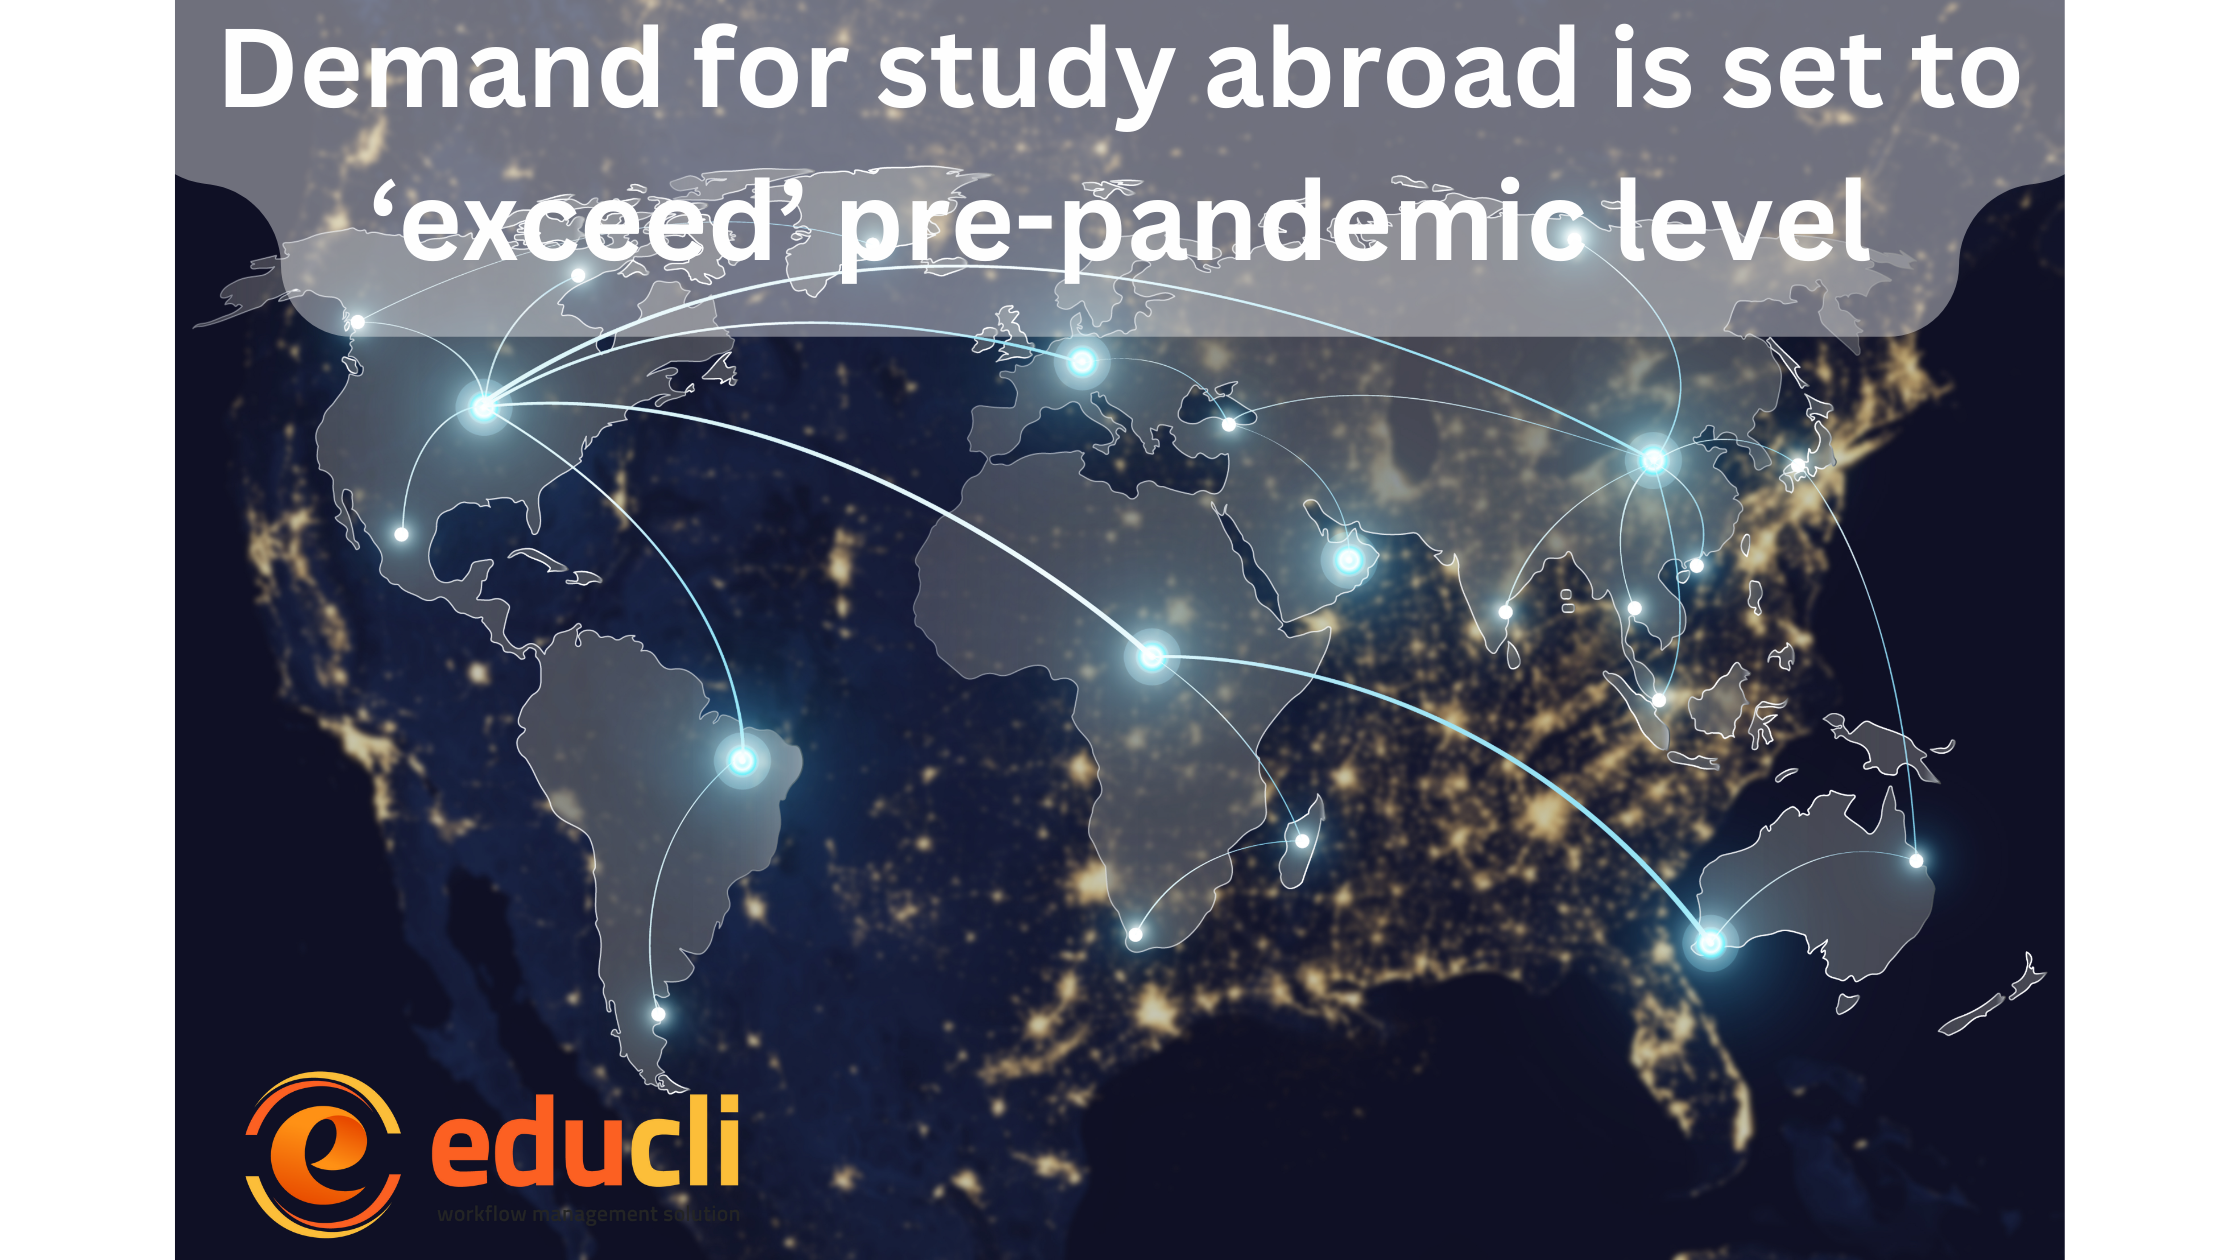 DEMAND FOR STUDY ABROAD IS SET TO ‘EXCEED’ PRE-PANDEMIC LEVEL